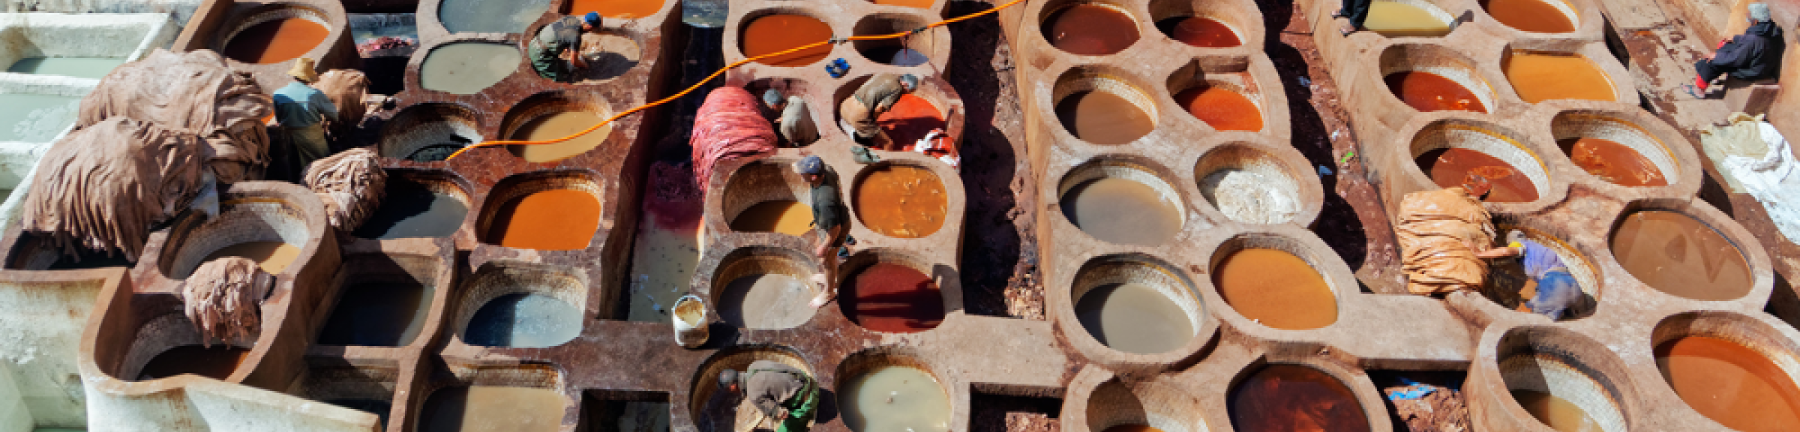 Photo of clay pots from above. The pots are filled with brightly coloured substances